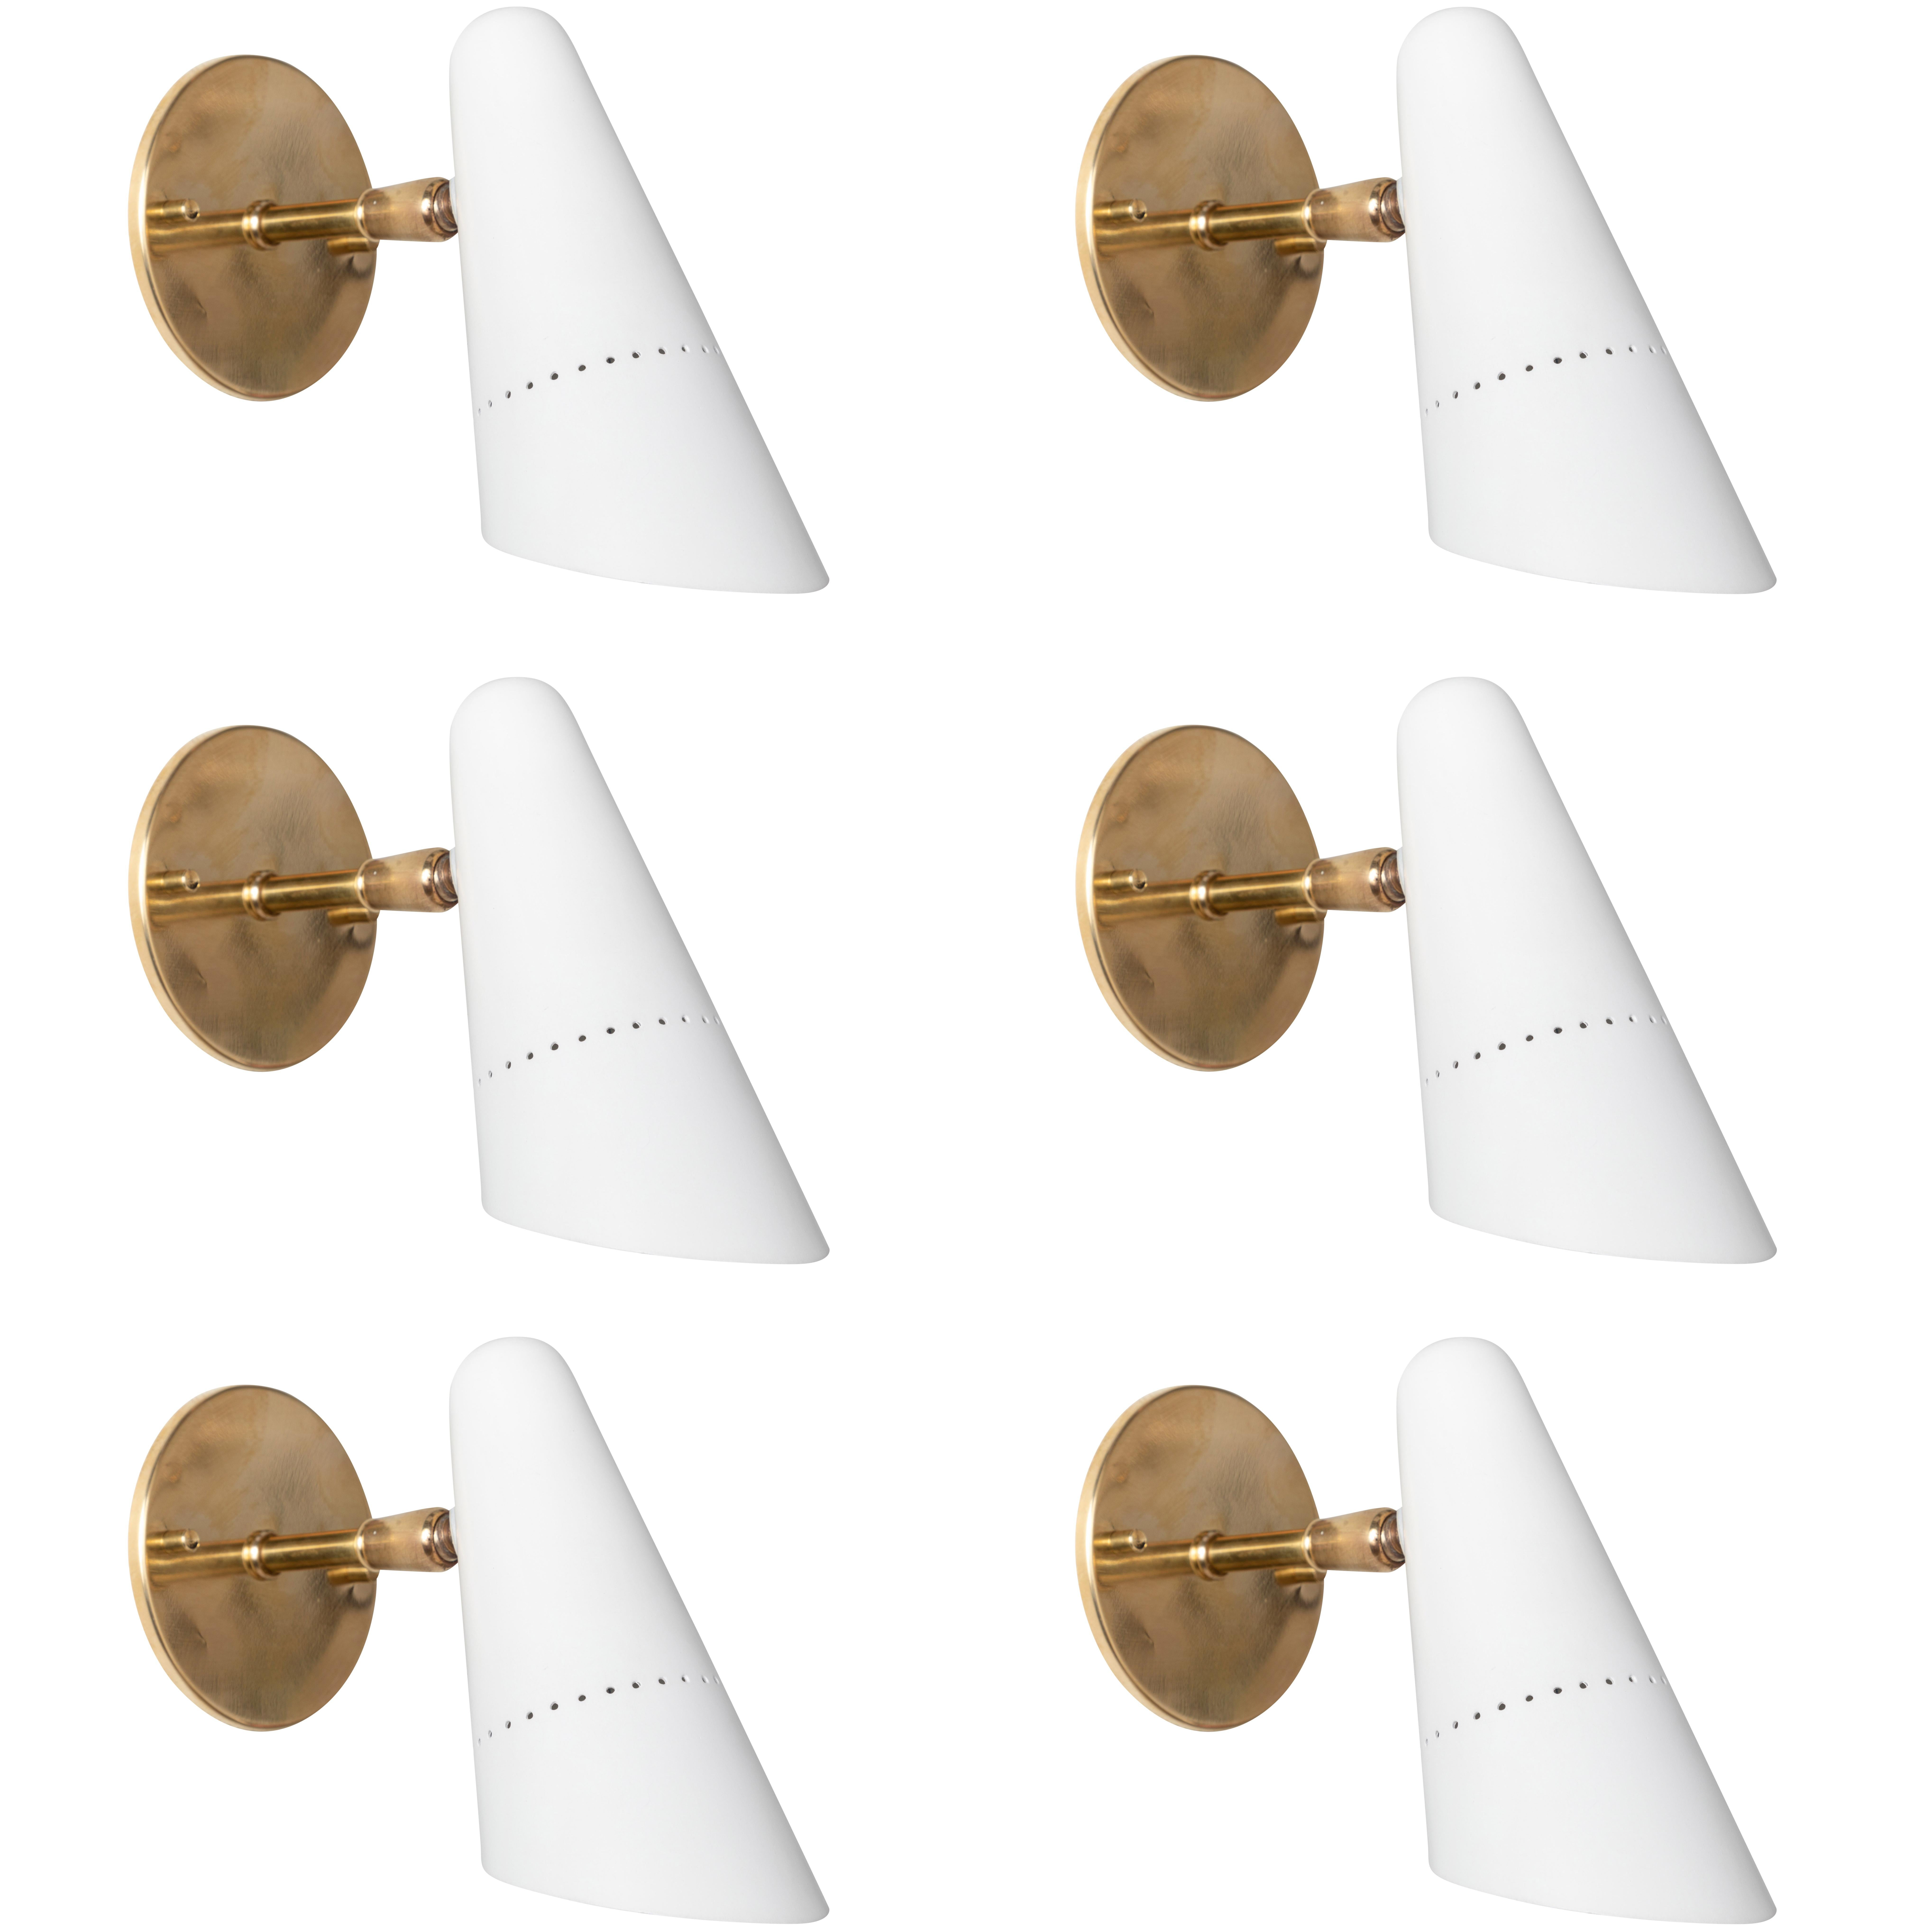 1950s Italian white articulating sconces attributed to Gino Sarfatti. Executed in brass and white painted aluminum. Sconces pivot up/down and left/right on a ball joint. Custom brass backplates with brass hardware for hardwiring mounting over